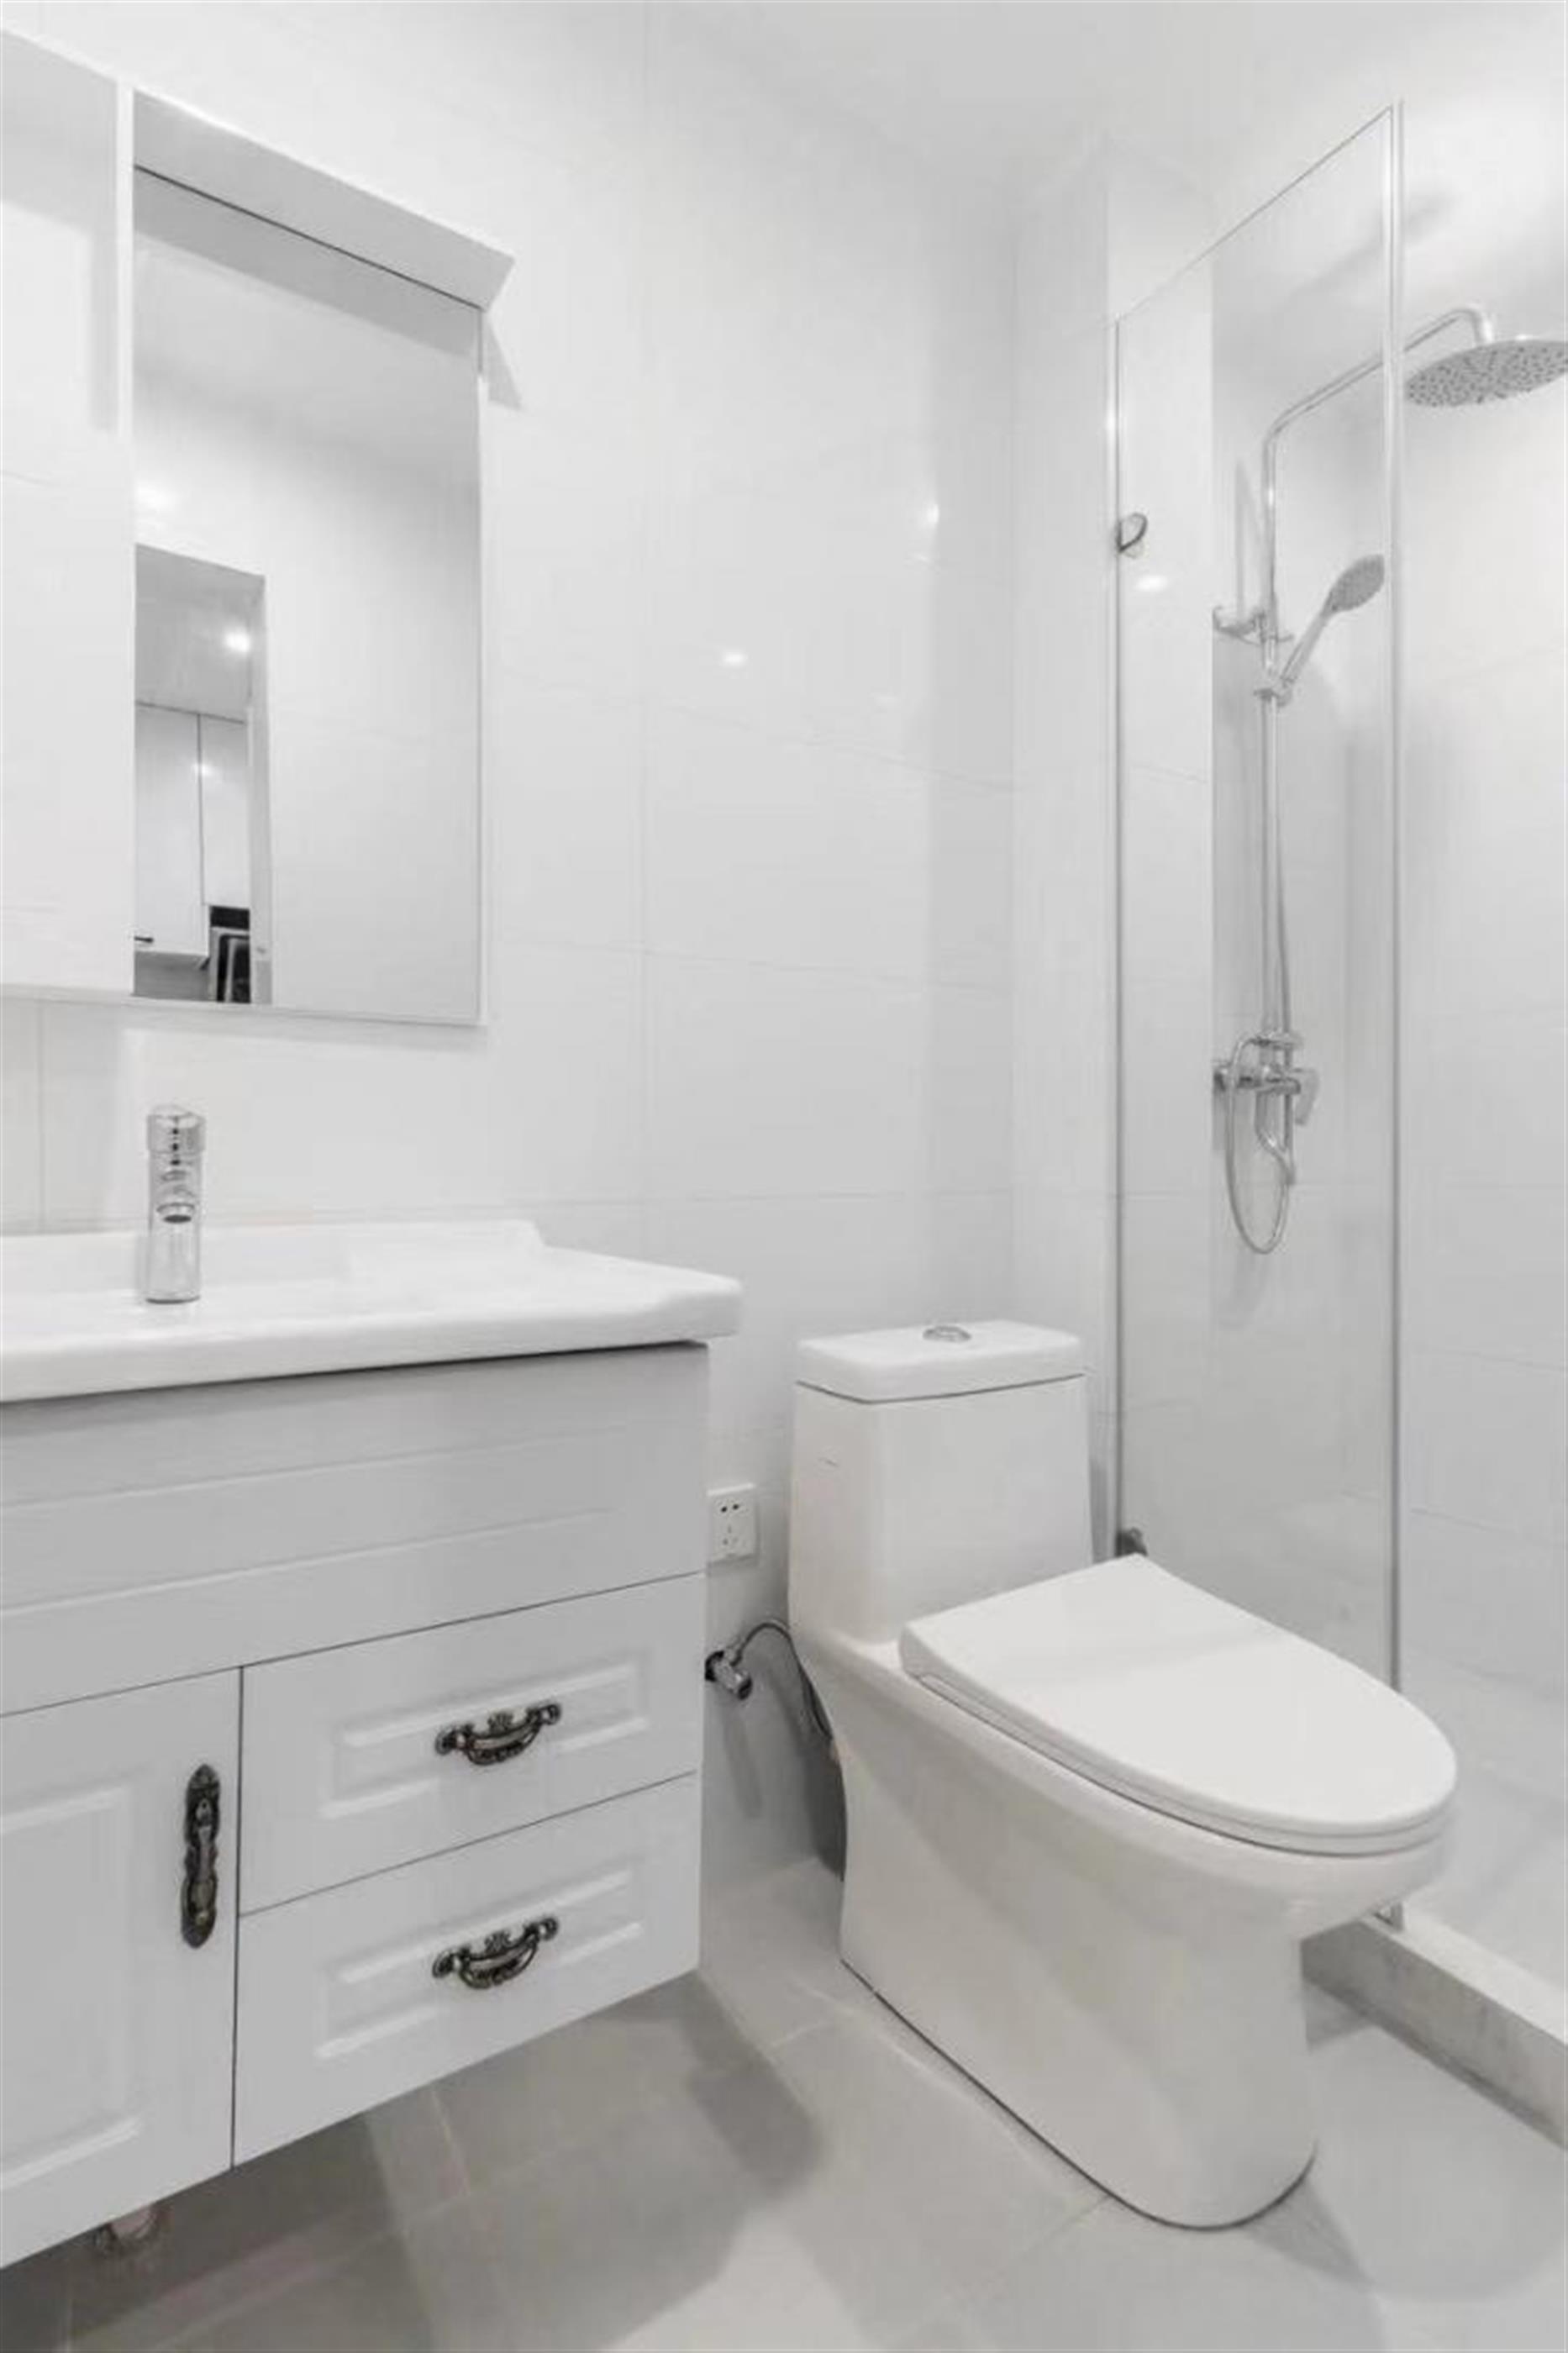 clean bathroom Renovated Bright Spacious 1BR Walk-up Apt Nr LN 3/4 for Rent in Shanghai